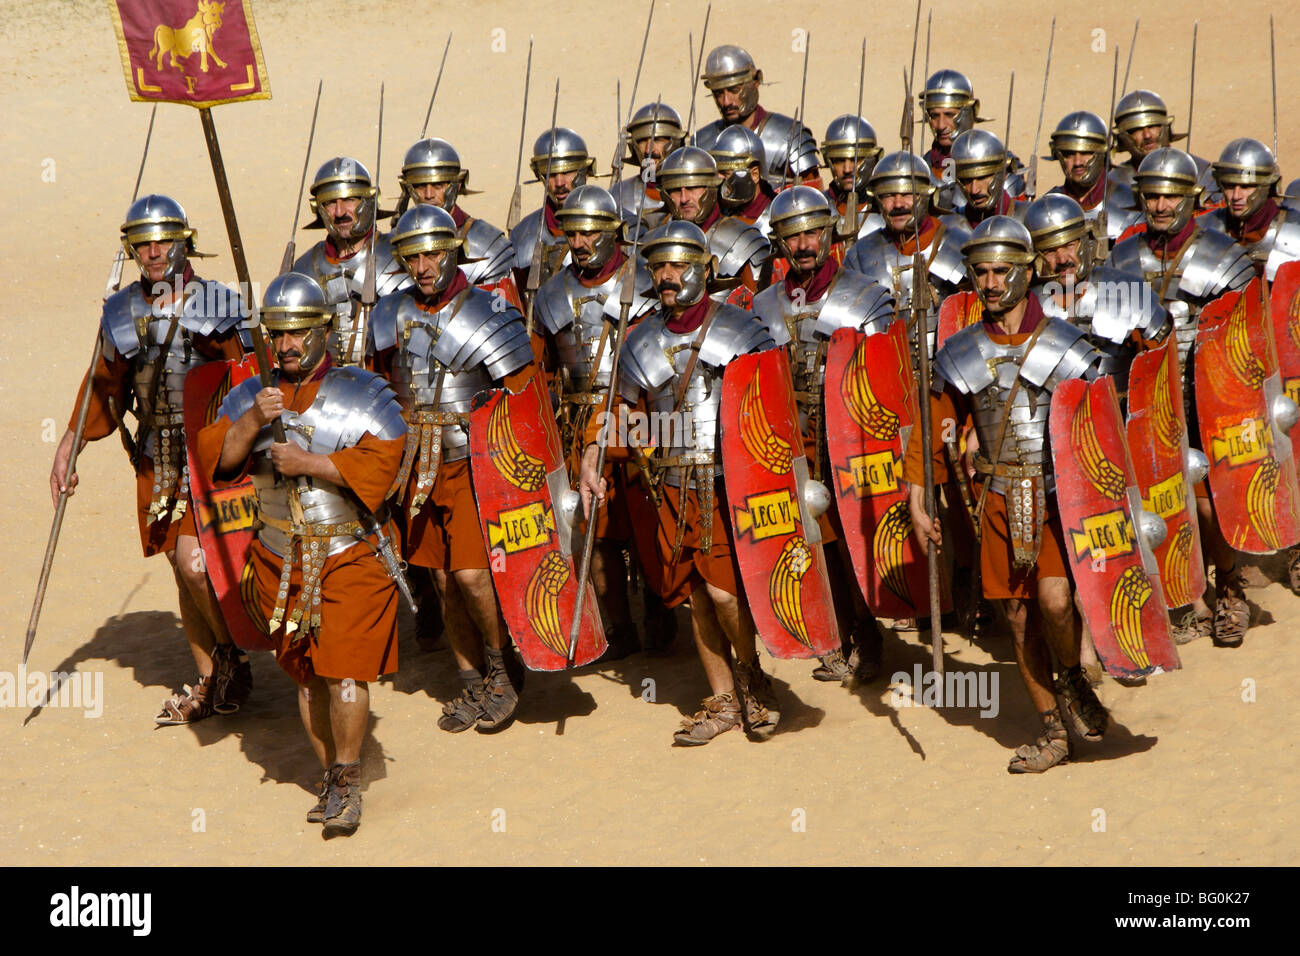 Ancient Roman Army Stock Photos & Ancient Roman Army Stock Images ...